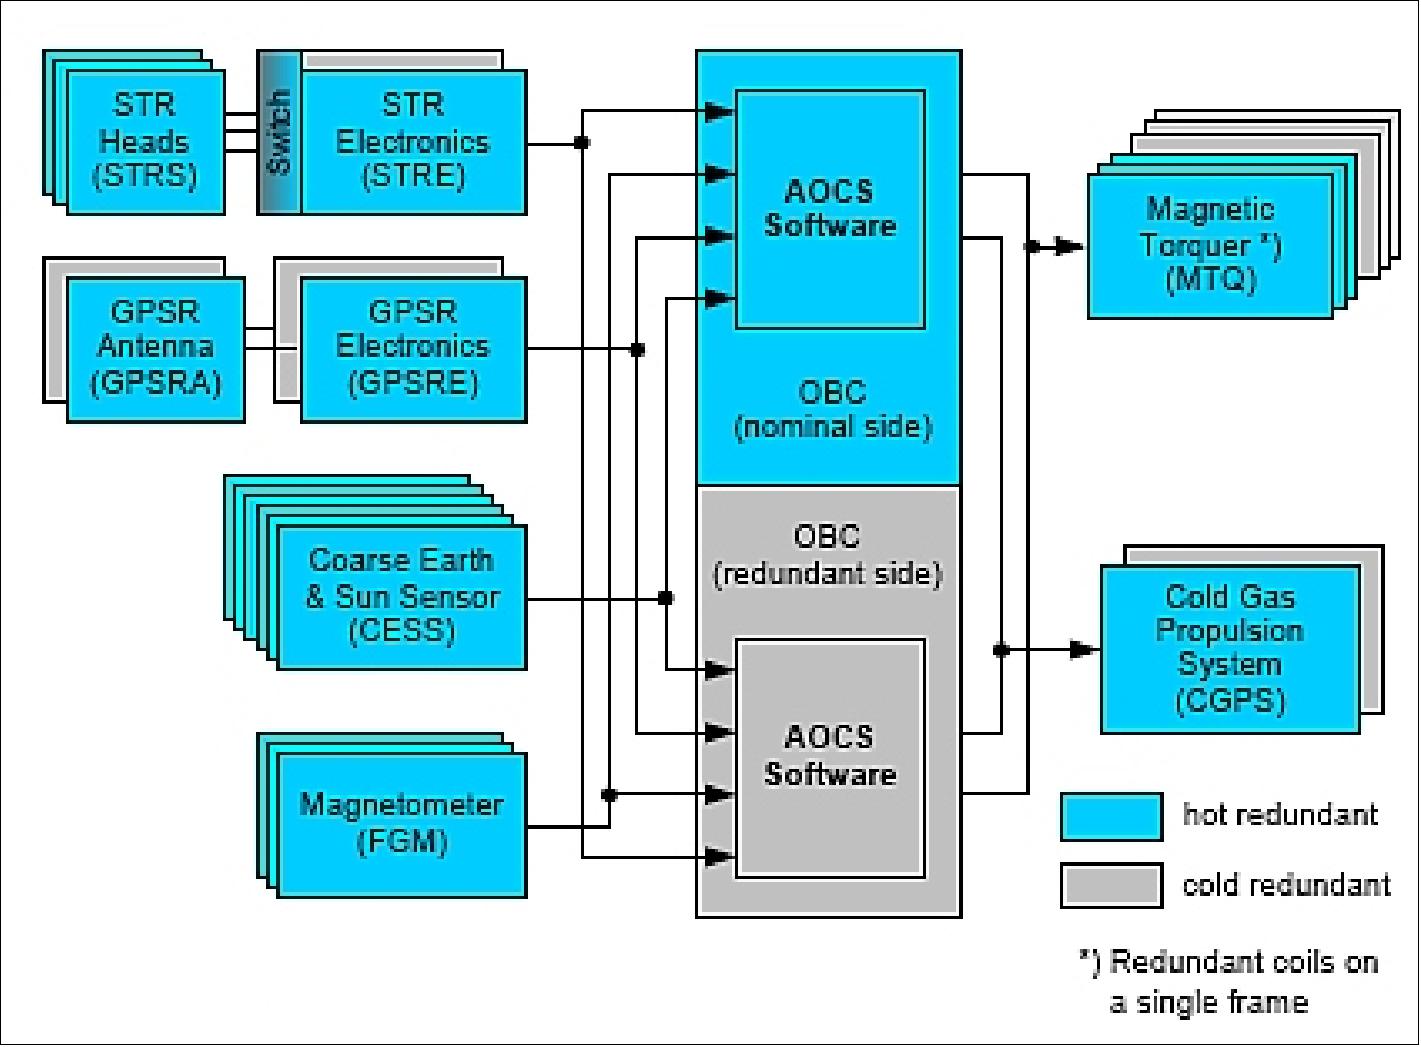 Figure 11: Functional architecture of AOCS (image credit: EADS Astrium)